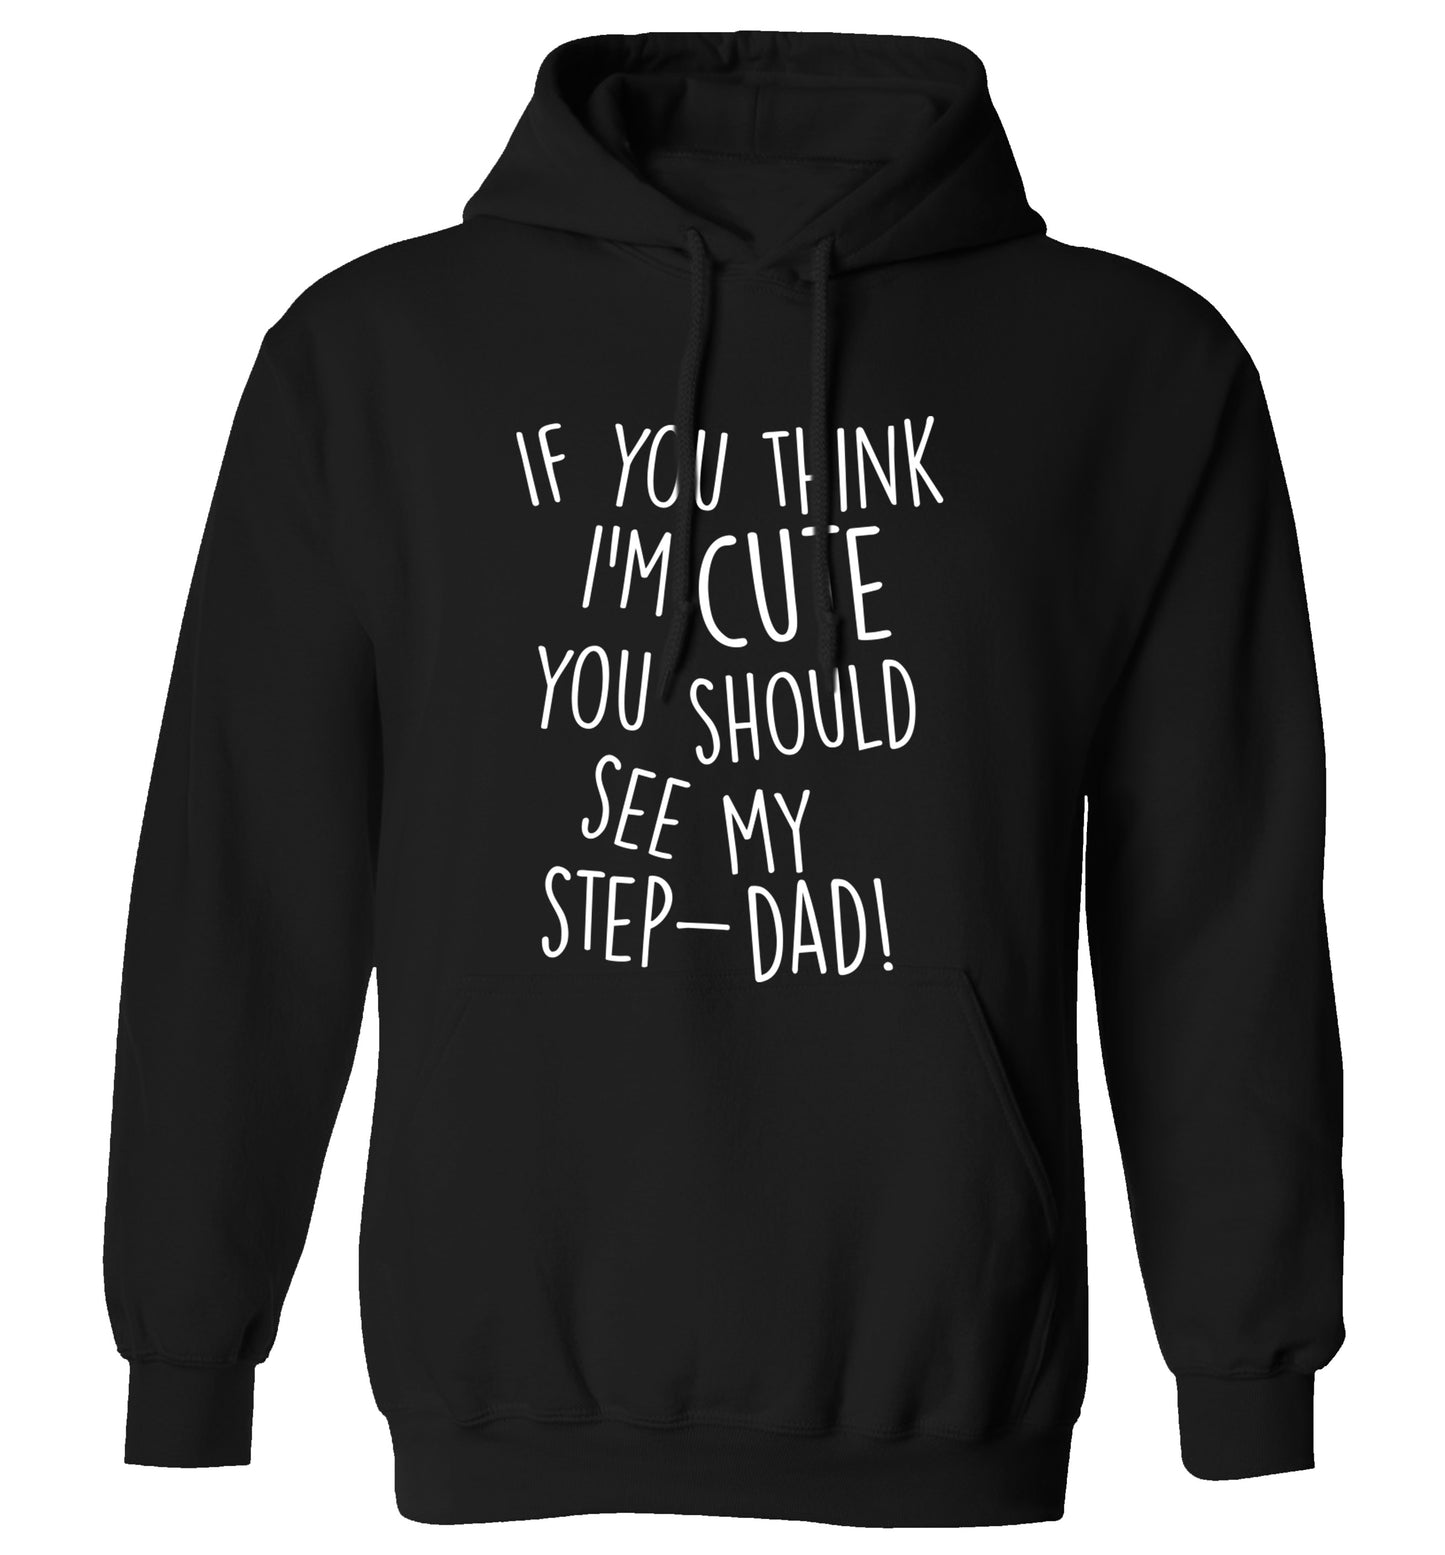 If you think I'm cute you should see my step-dad adults unisex black hoodie 2XL